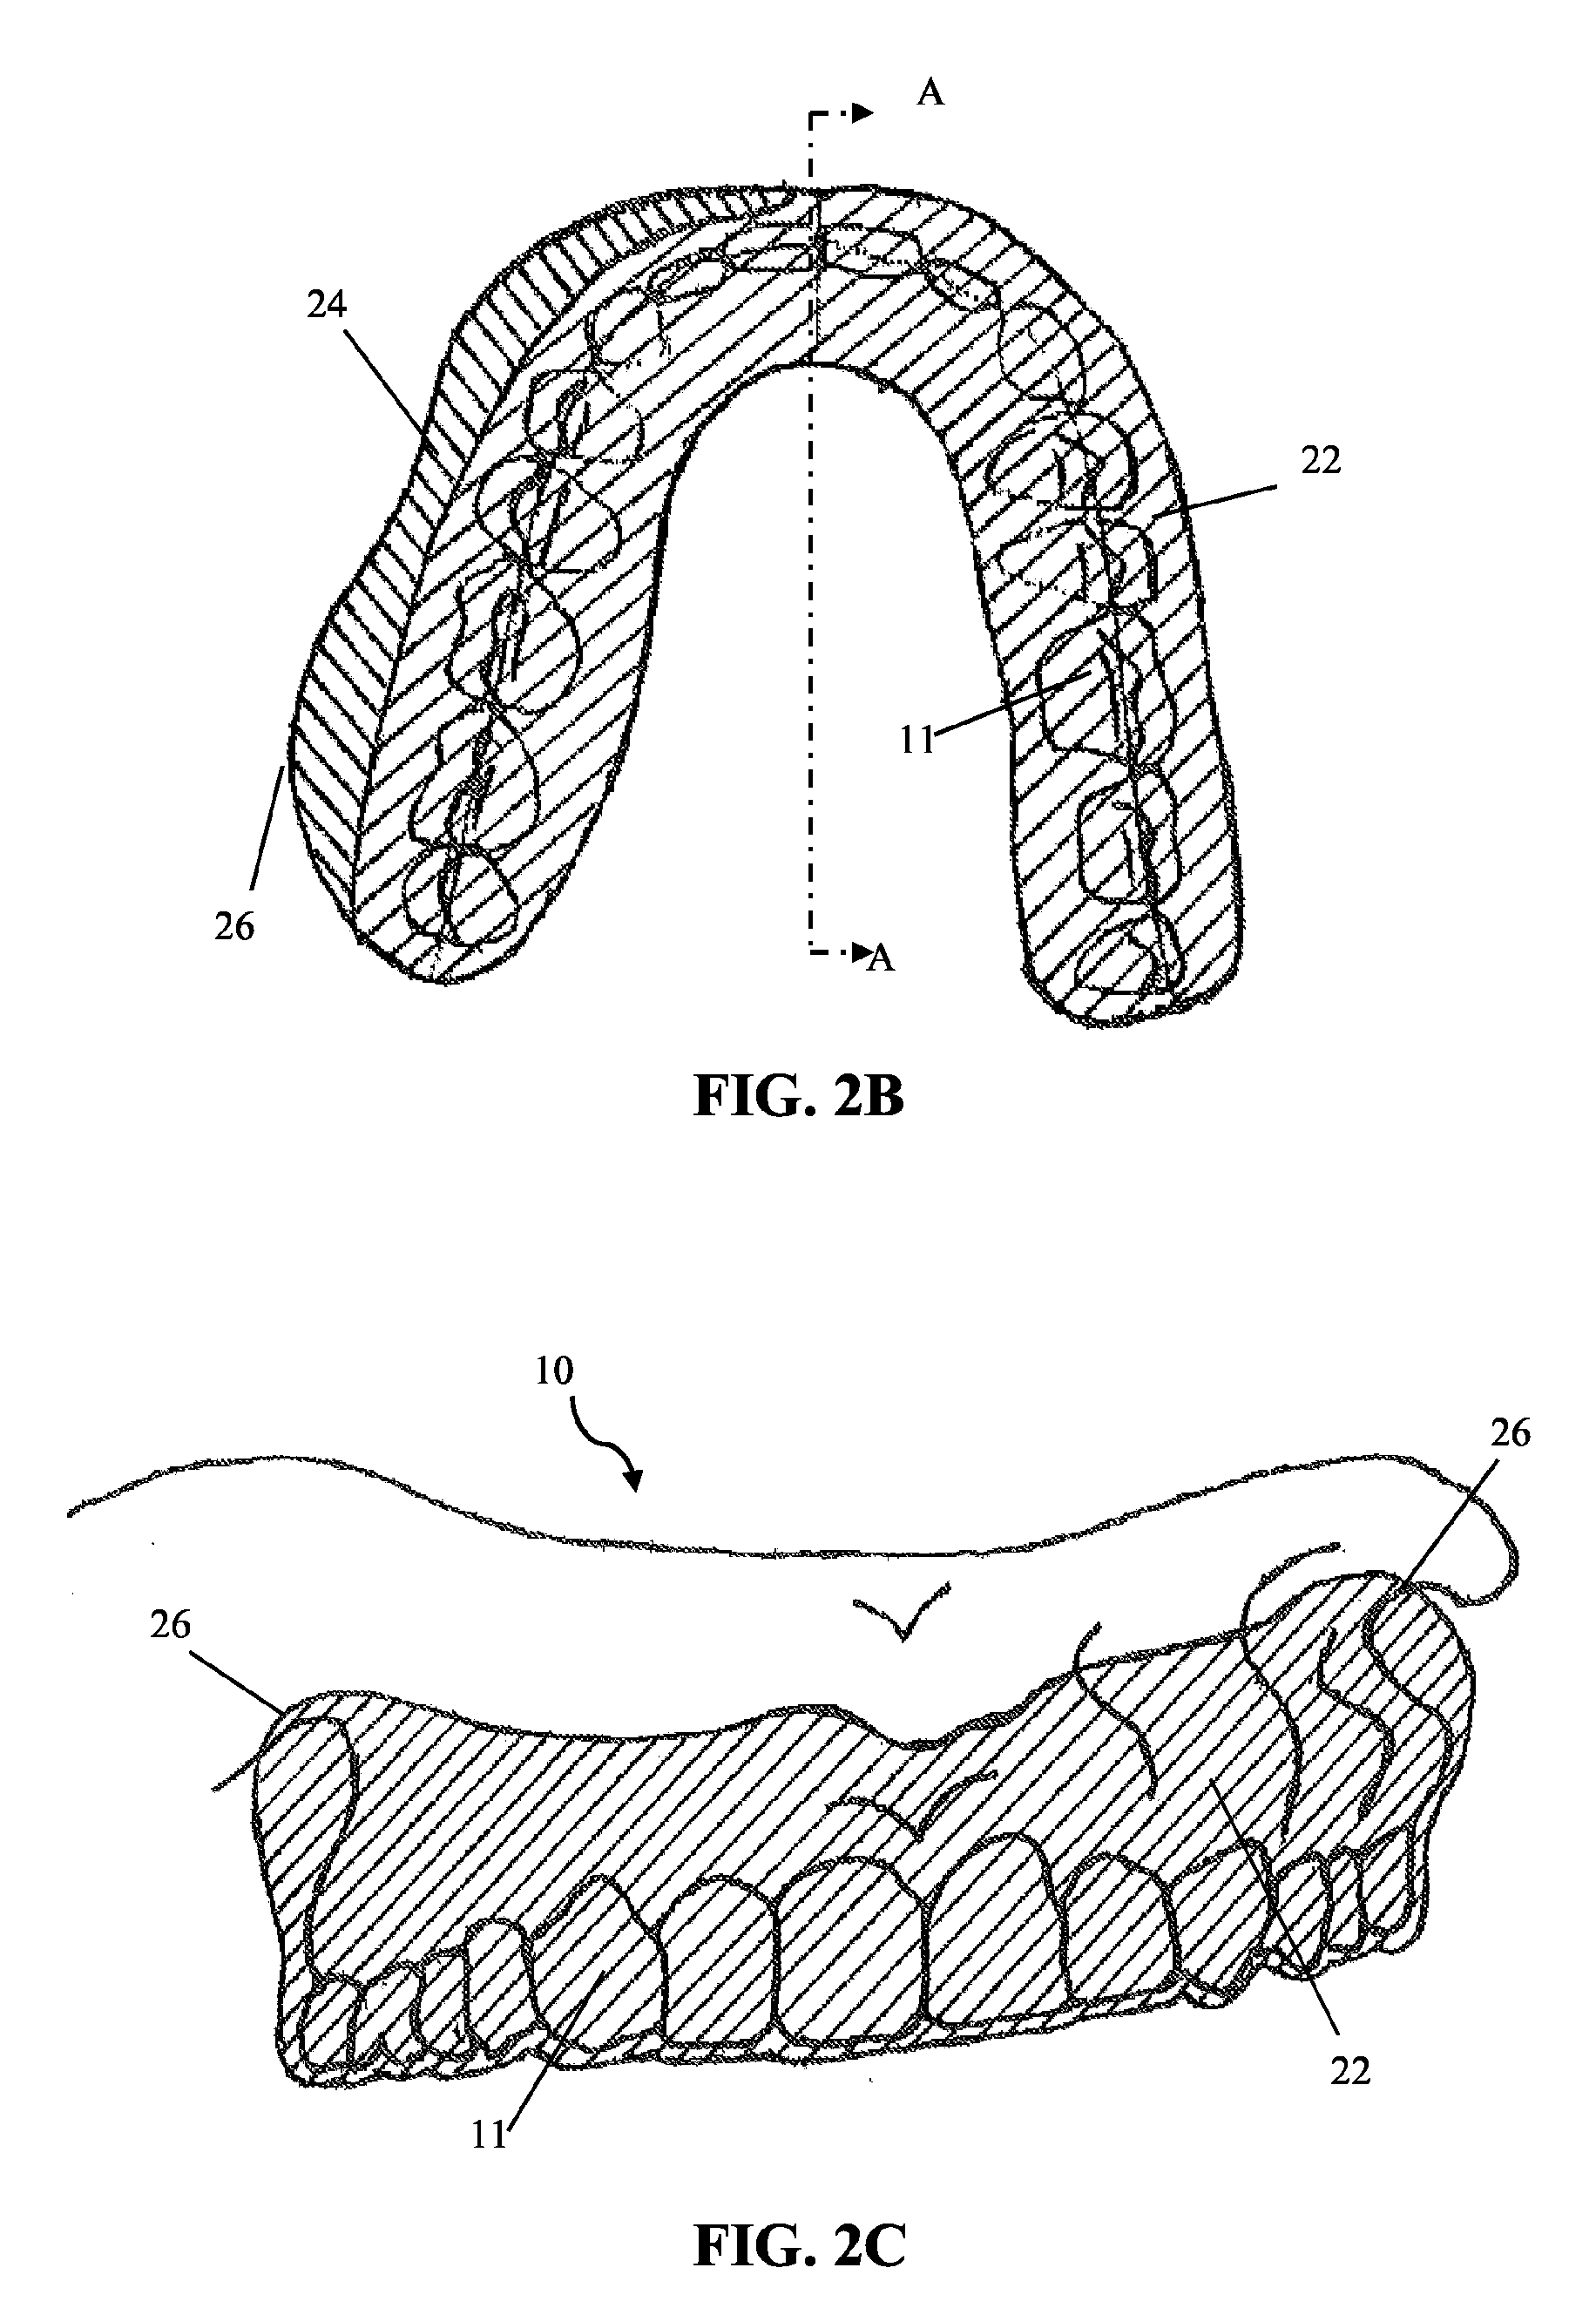 Intra-oral appliance and methods of using same